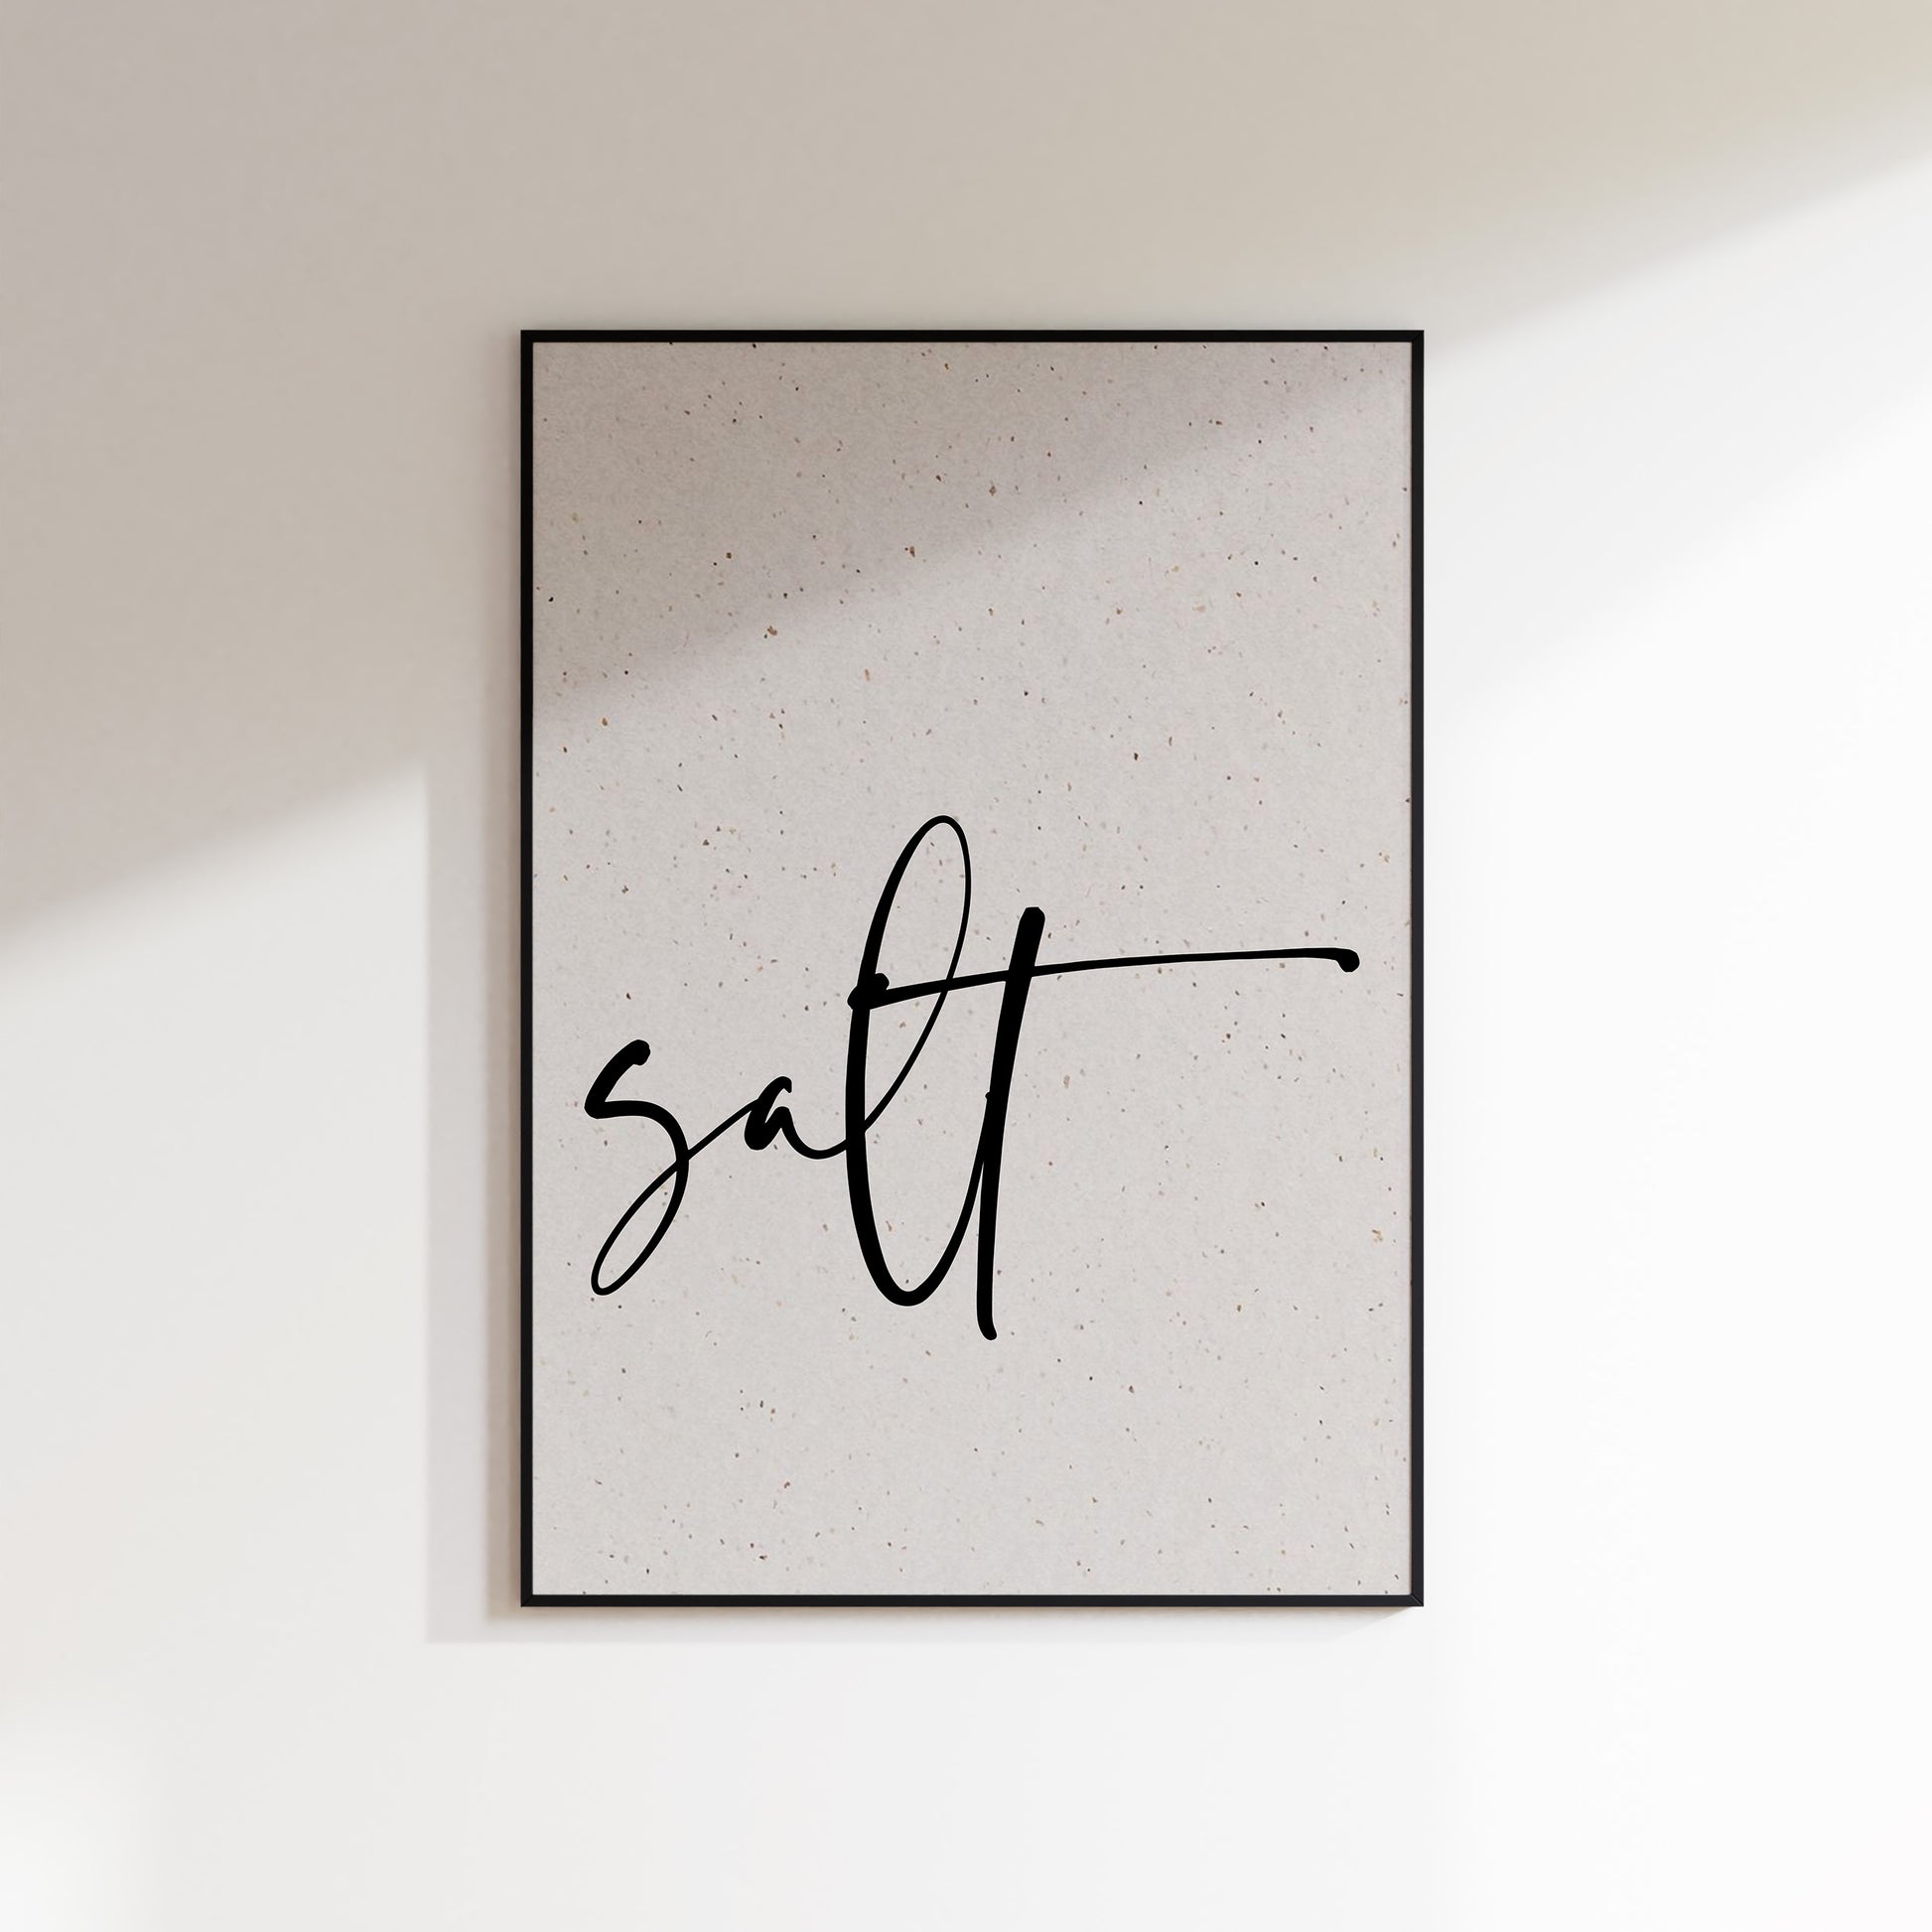 A print on textured paper with black text that reads 'salt' in a handwriting style typeface. A culinary print for the kitchen. Print is in a black frame on a white wall background.